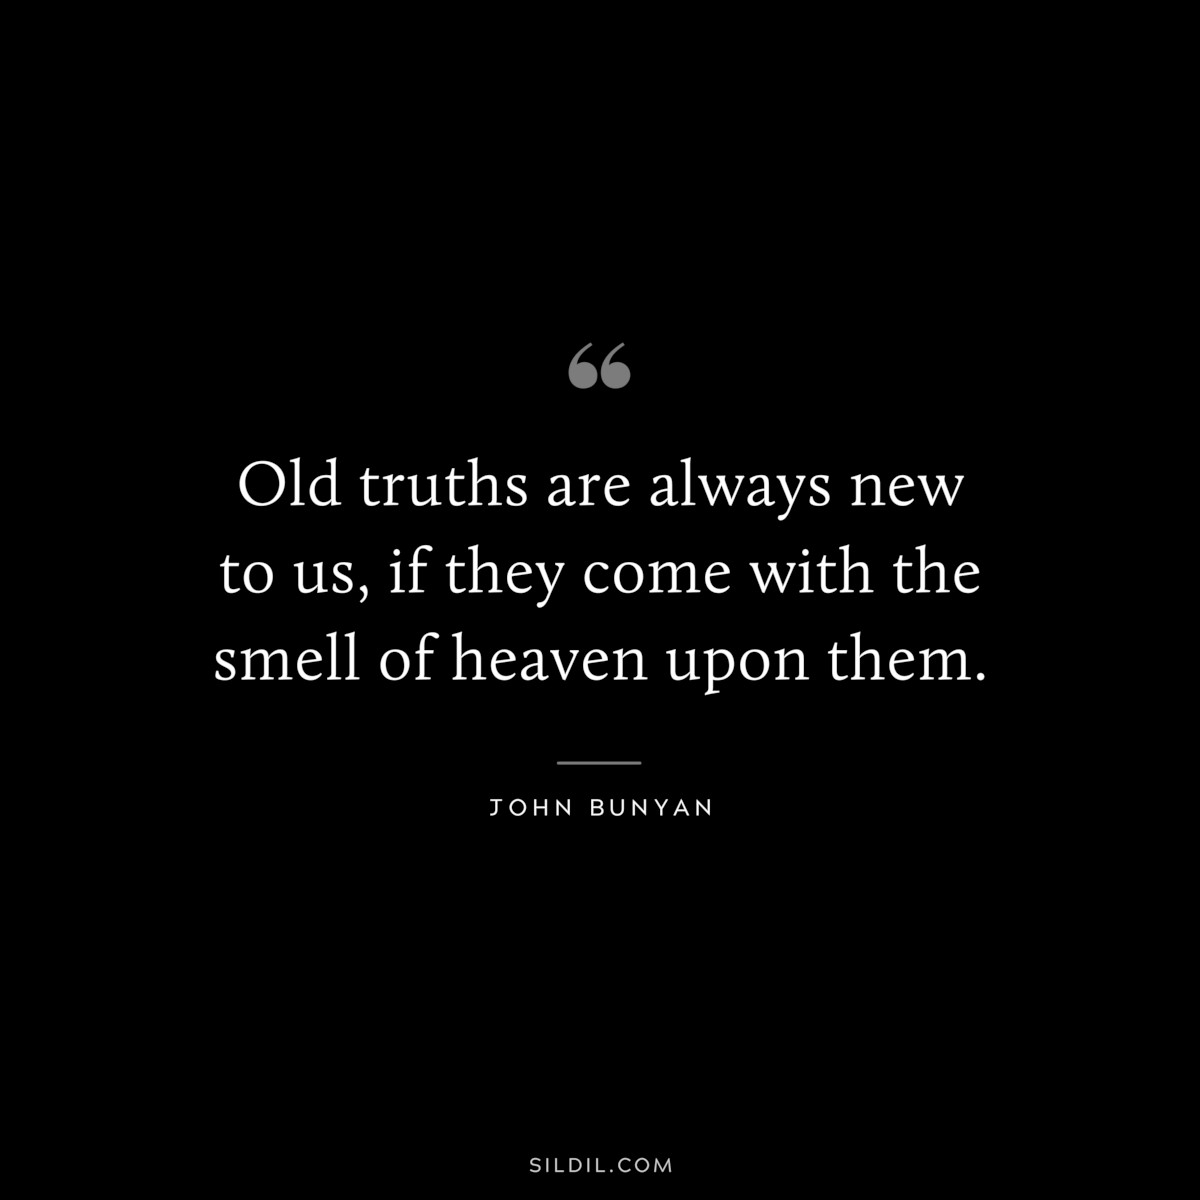 Old truths are always new to us, if they come with the smell of heaven upon them. ― John Bunyan